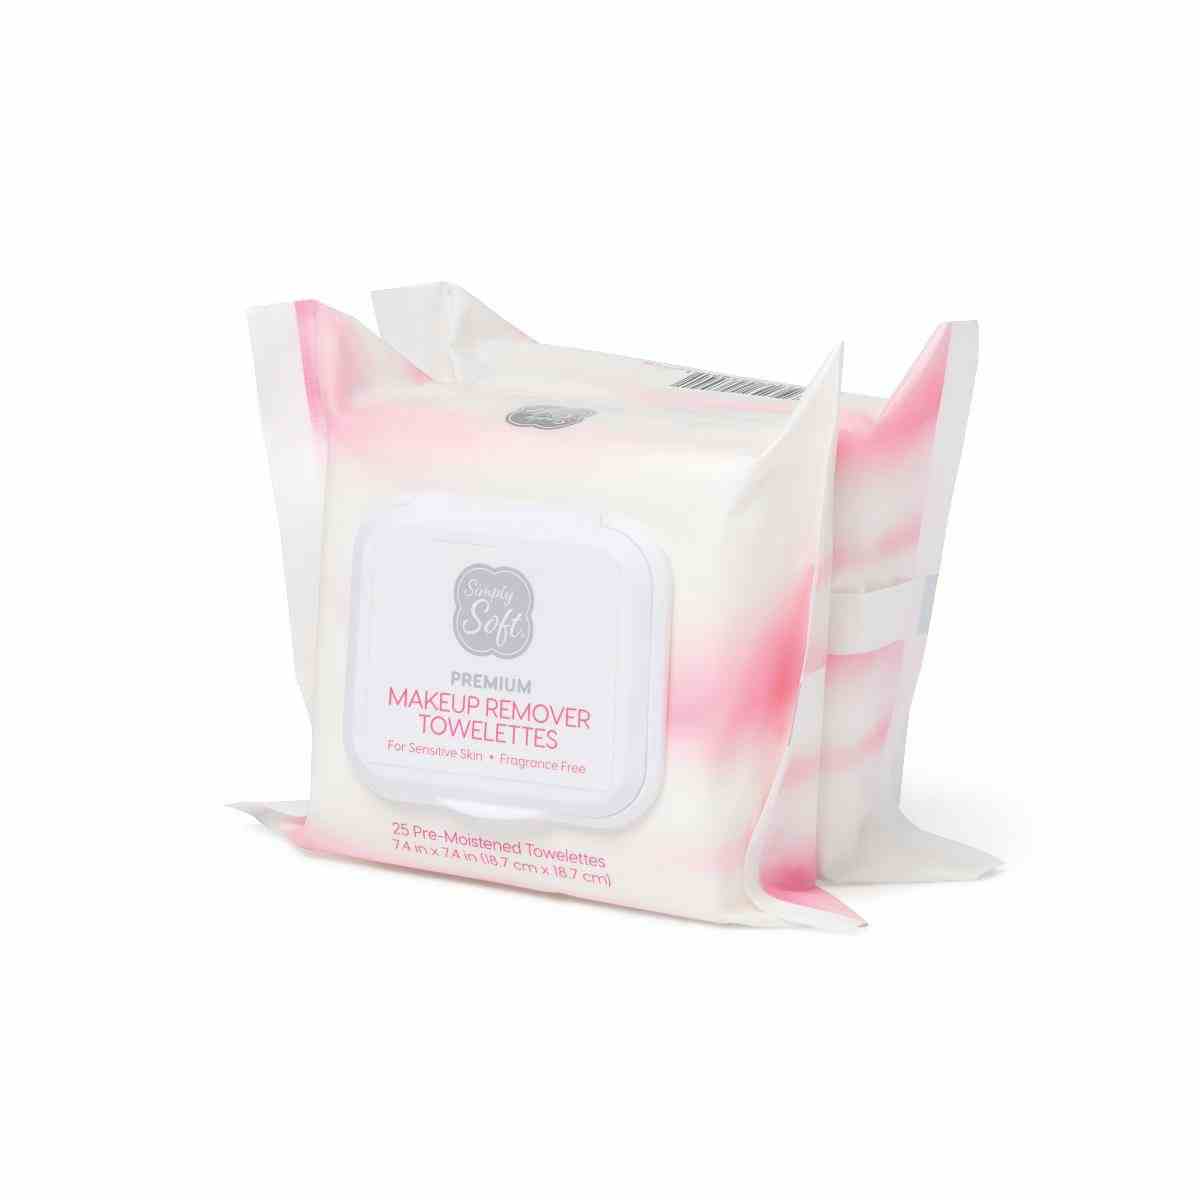 Simply Soft Premium Makeup Remover Wipes, Fragrance Free, RSS1402, Case of 12